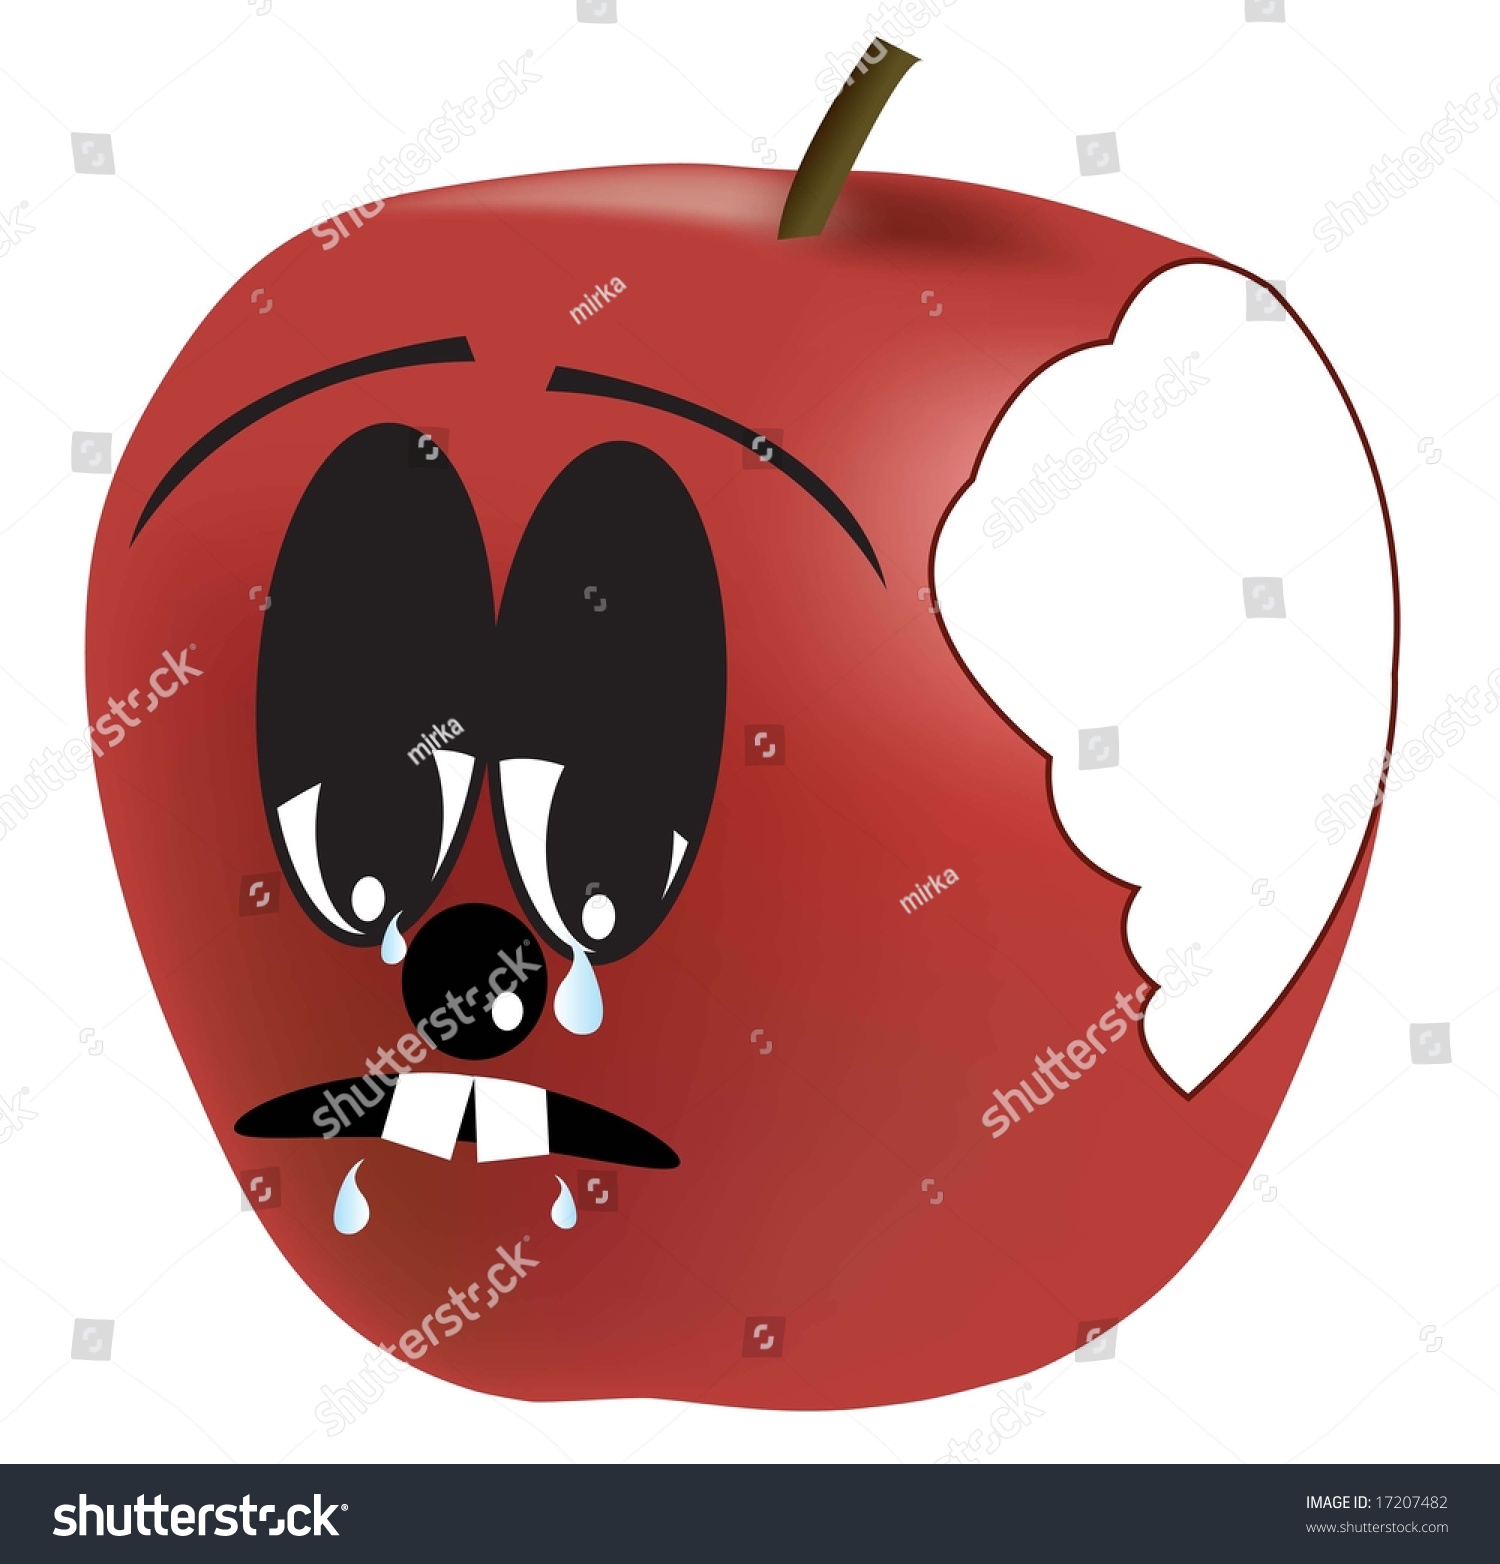 Red Apple Crying Stock Vector 17207482 - Shutterstock